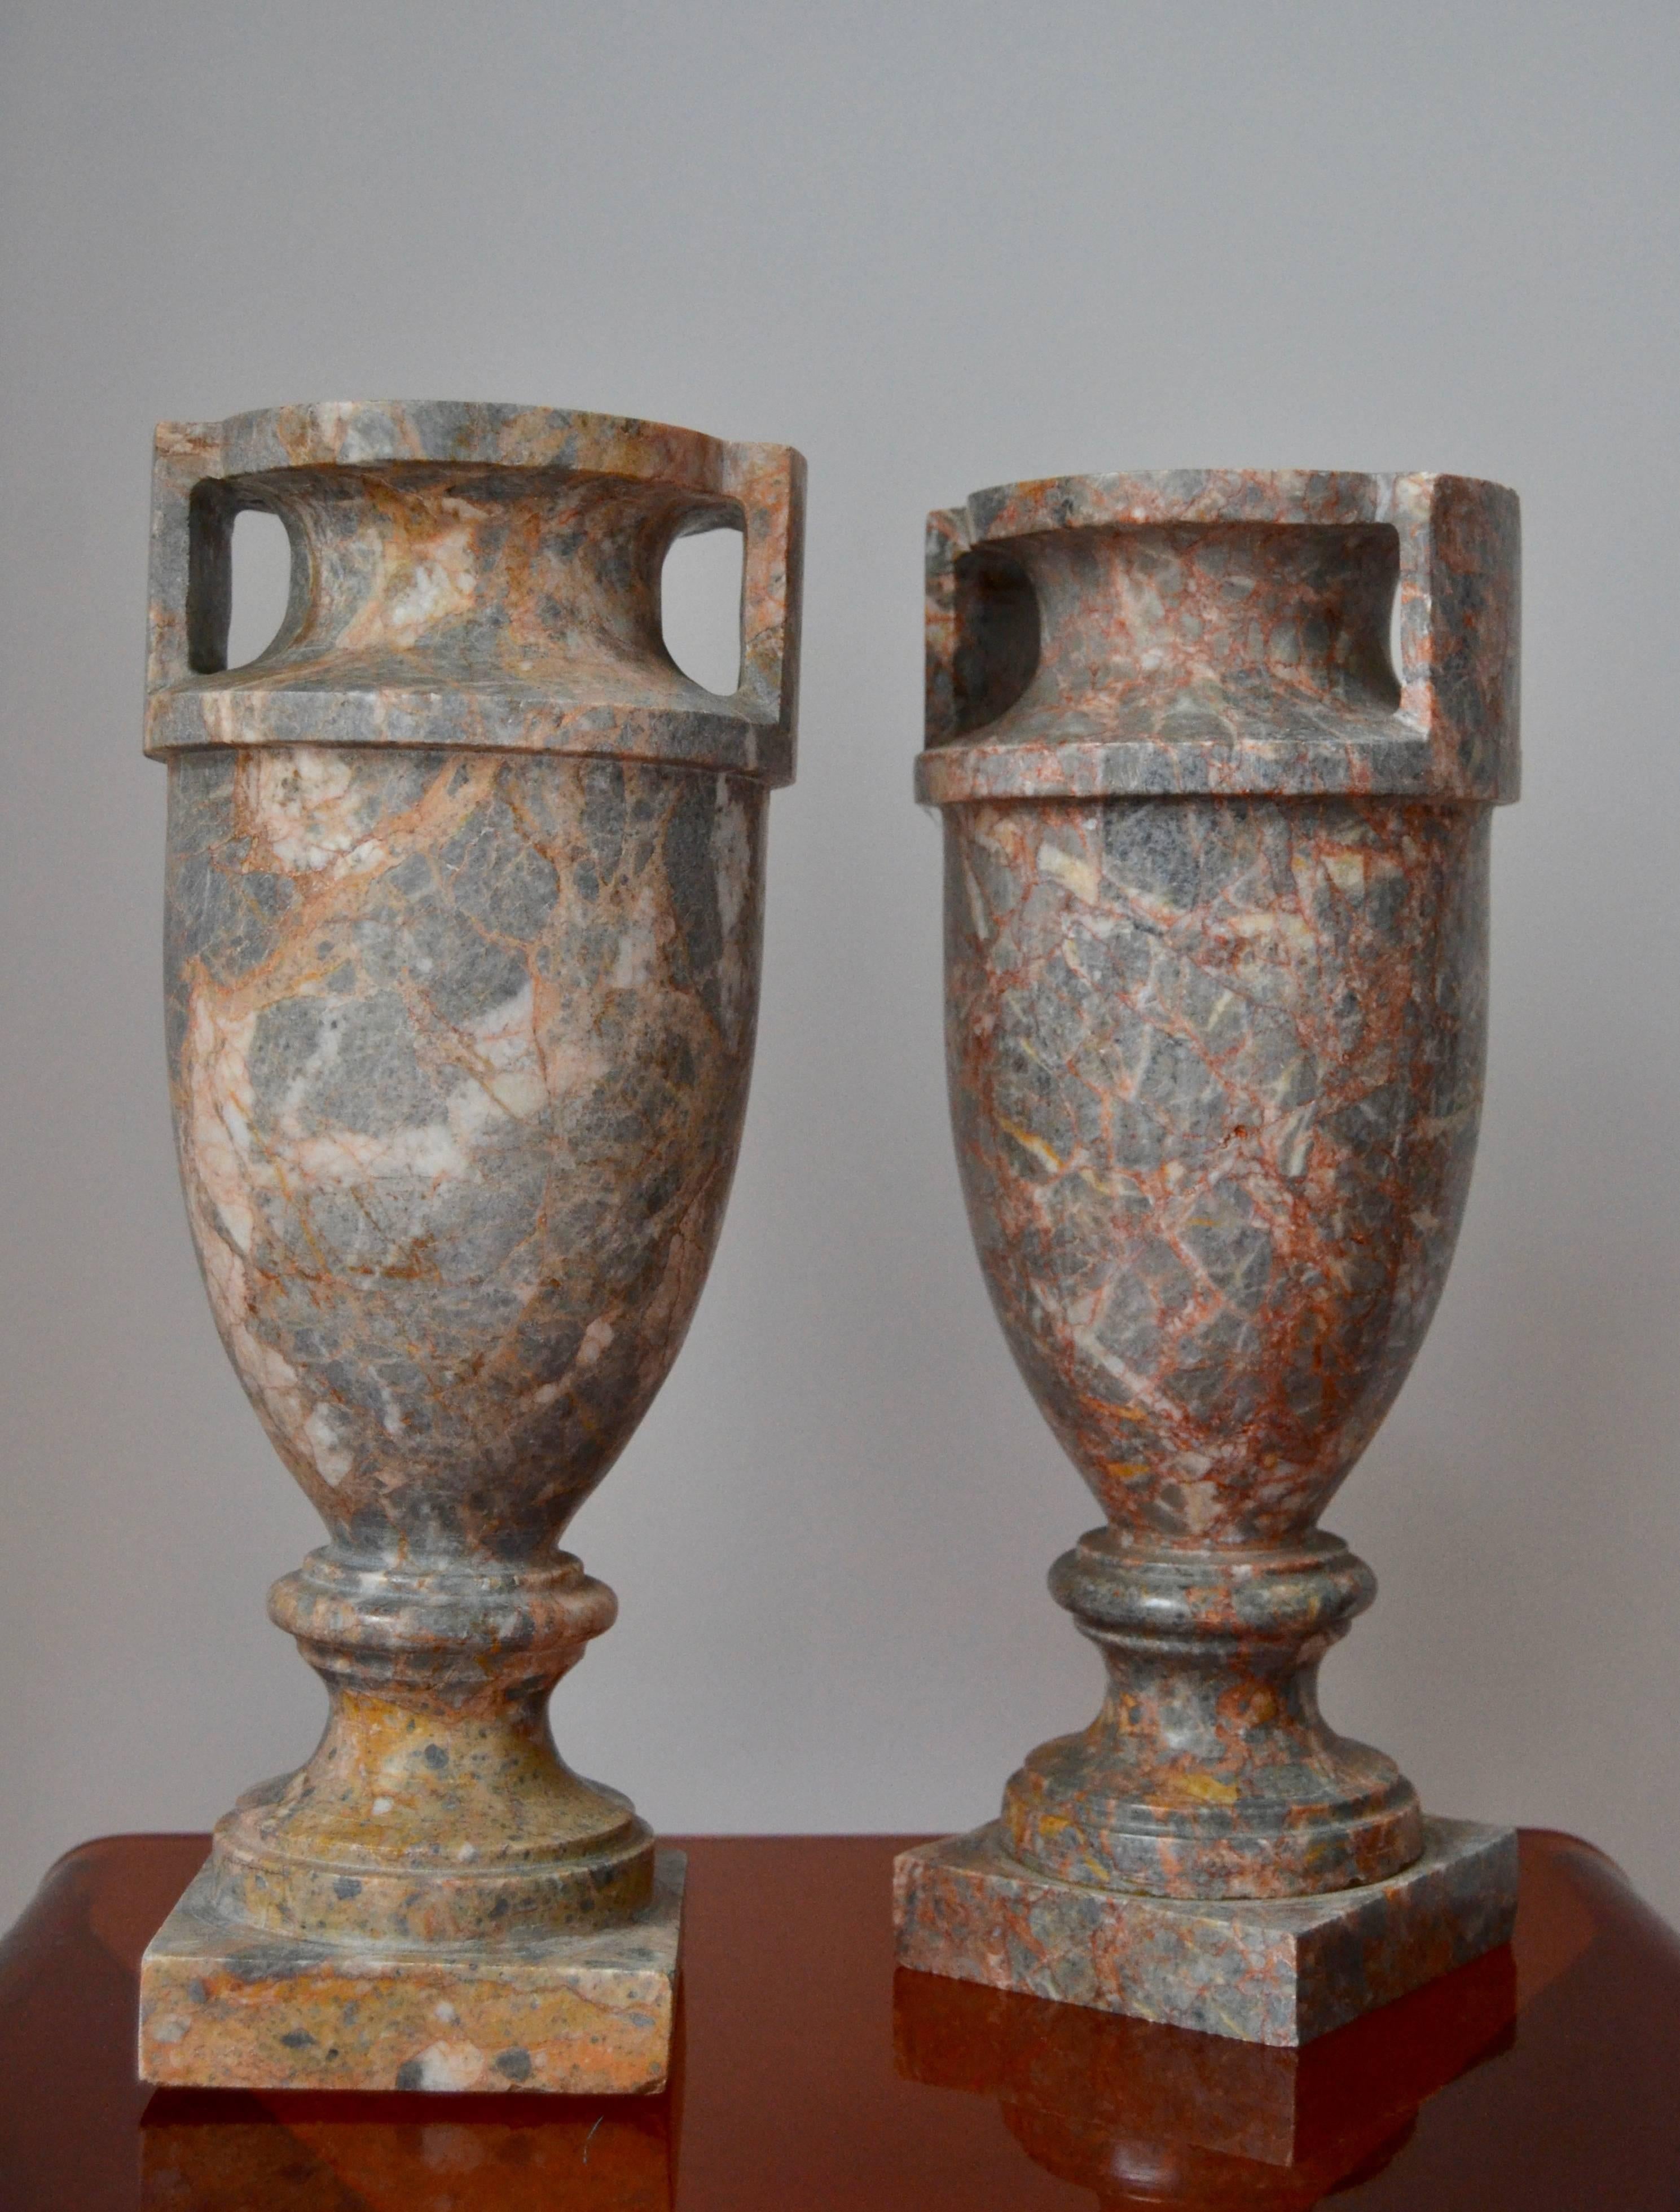 Pair of Italian Marble Urns with red and amber tone.